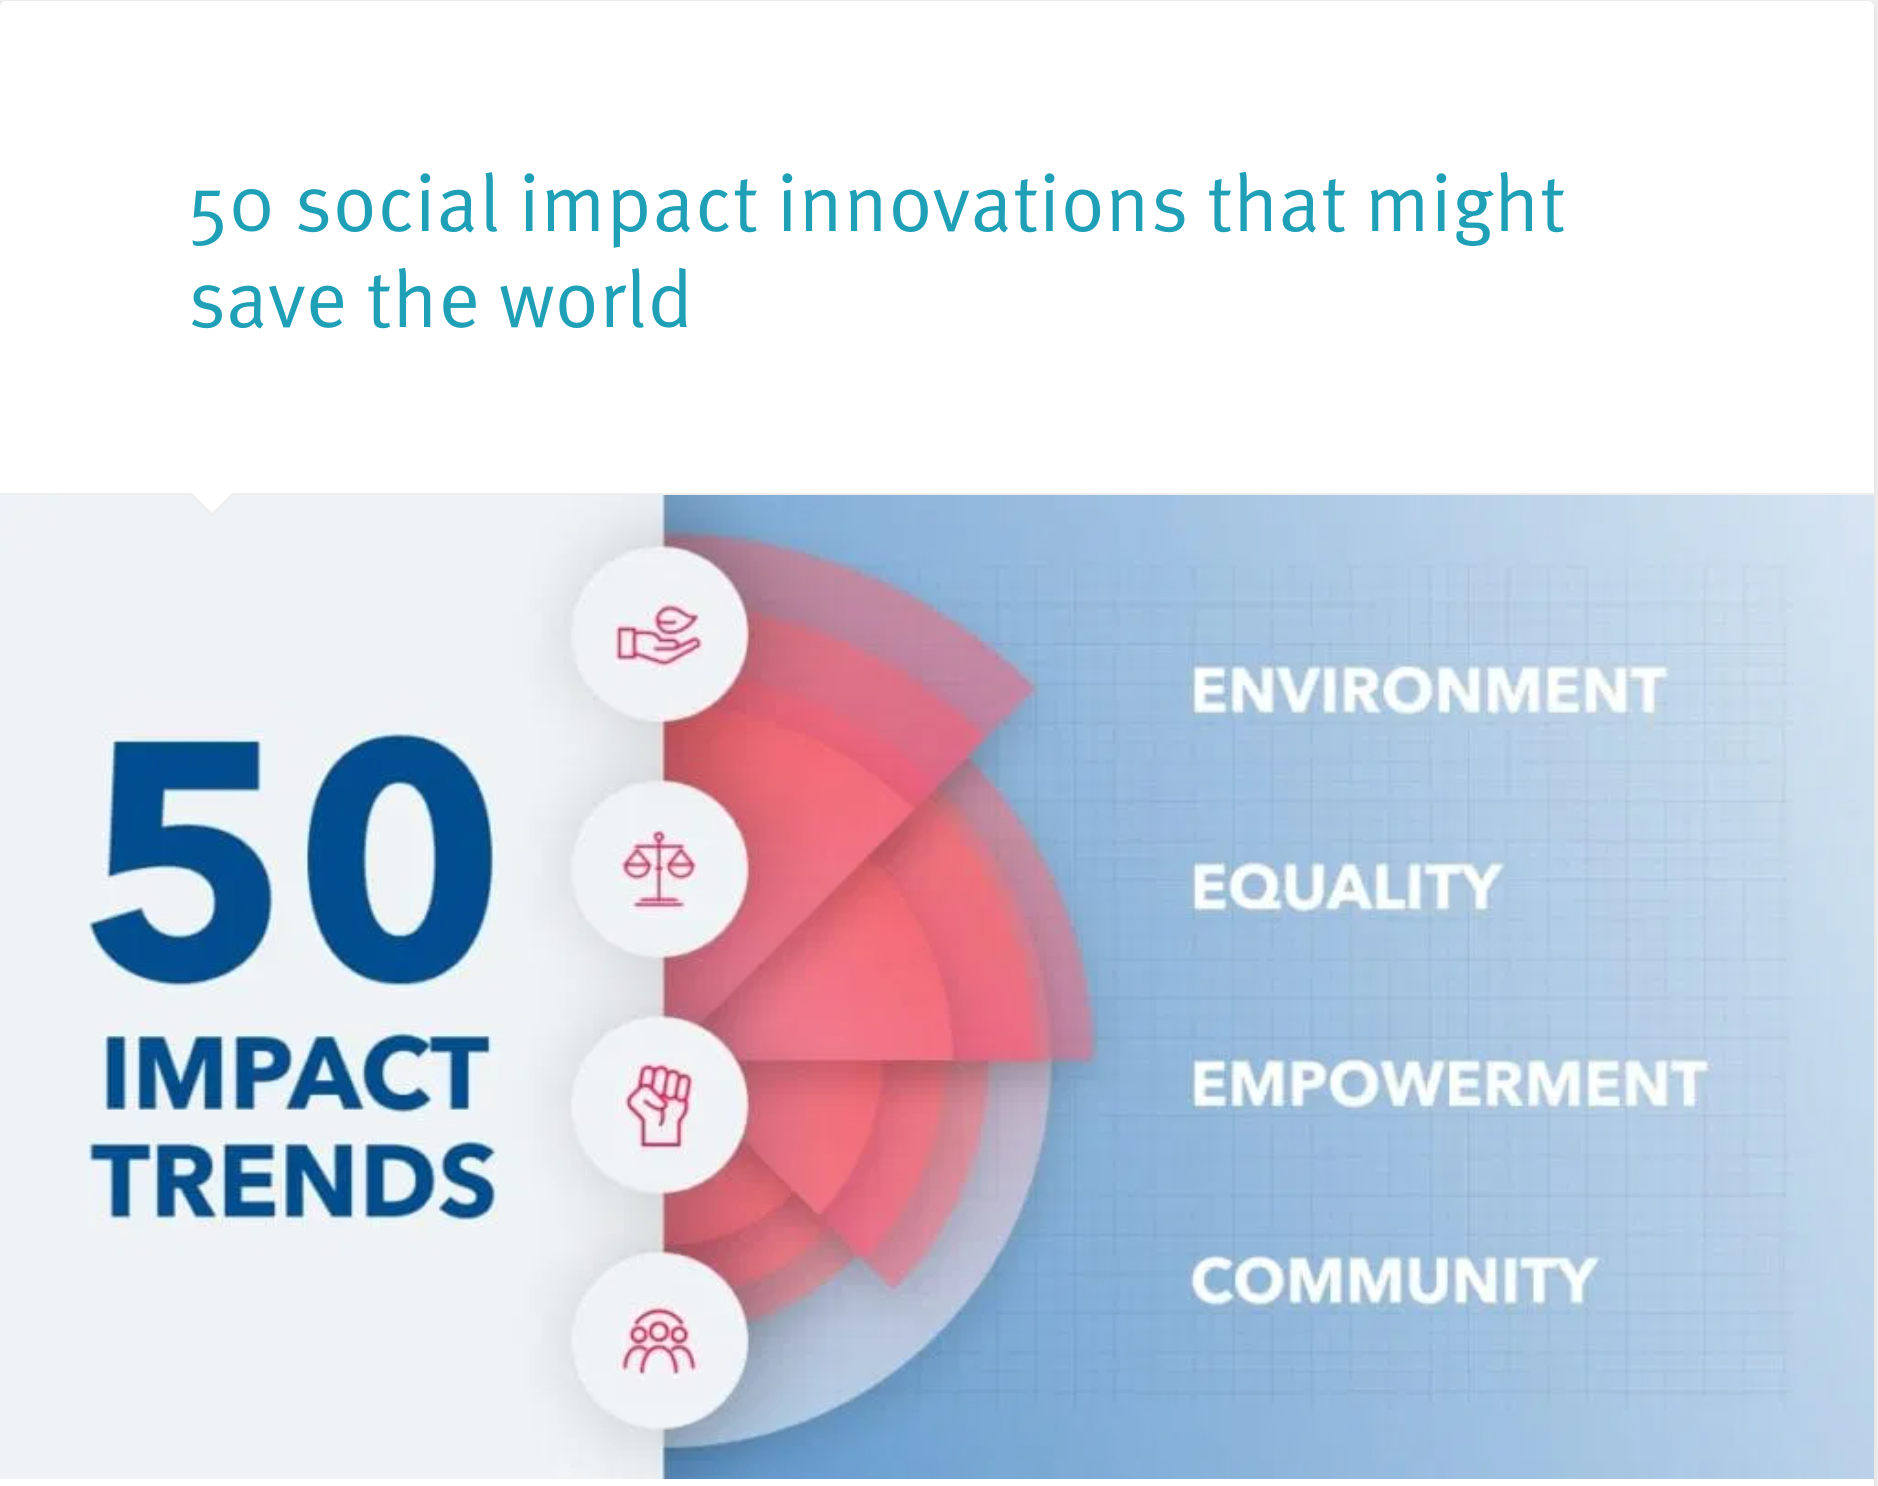 WildTrack a 'social impact innovator that might save the world'